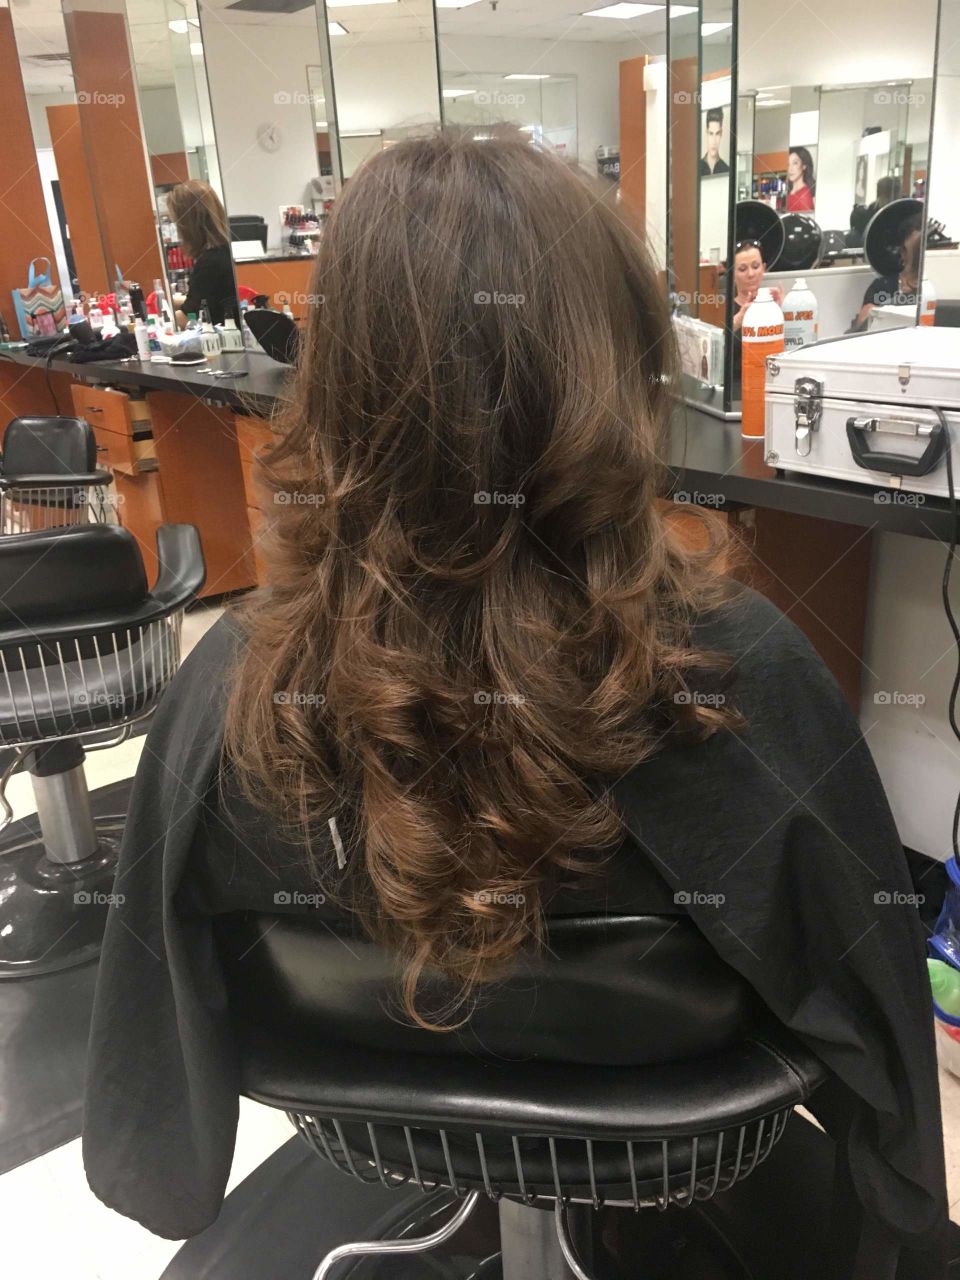 Long layers cut and style done by yours truly 